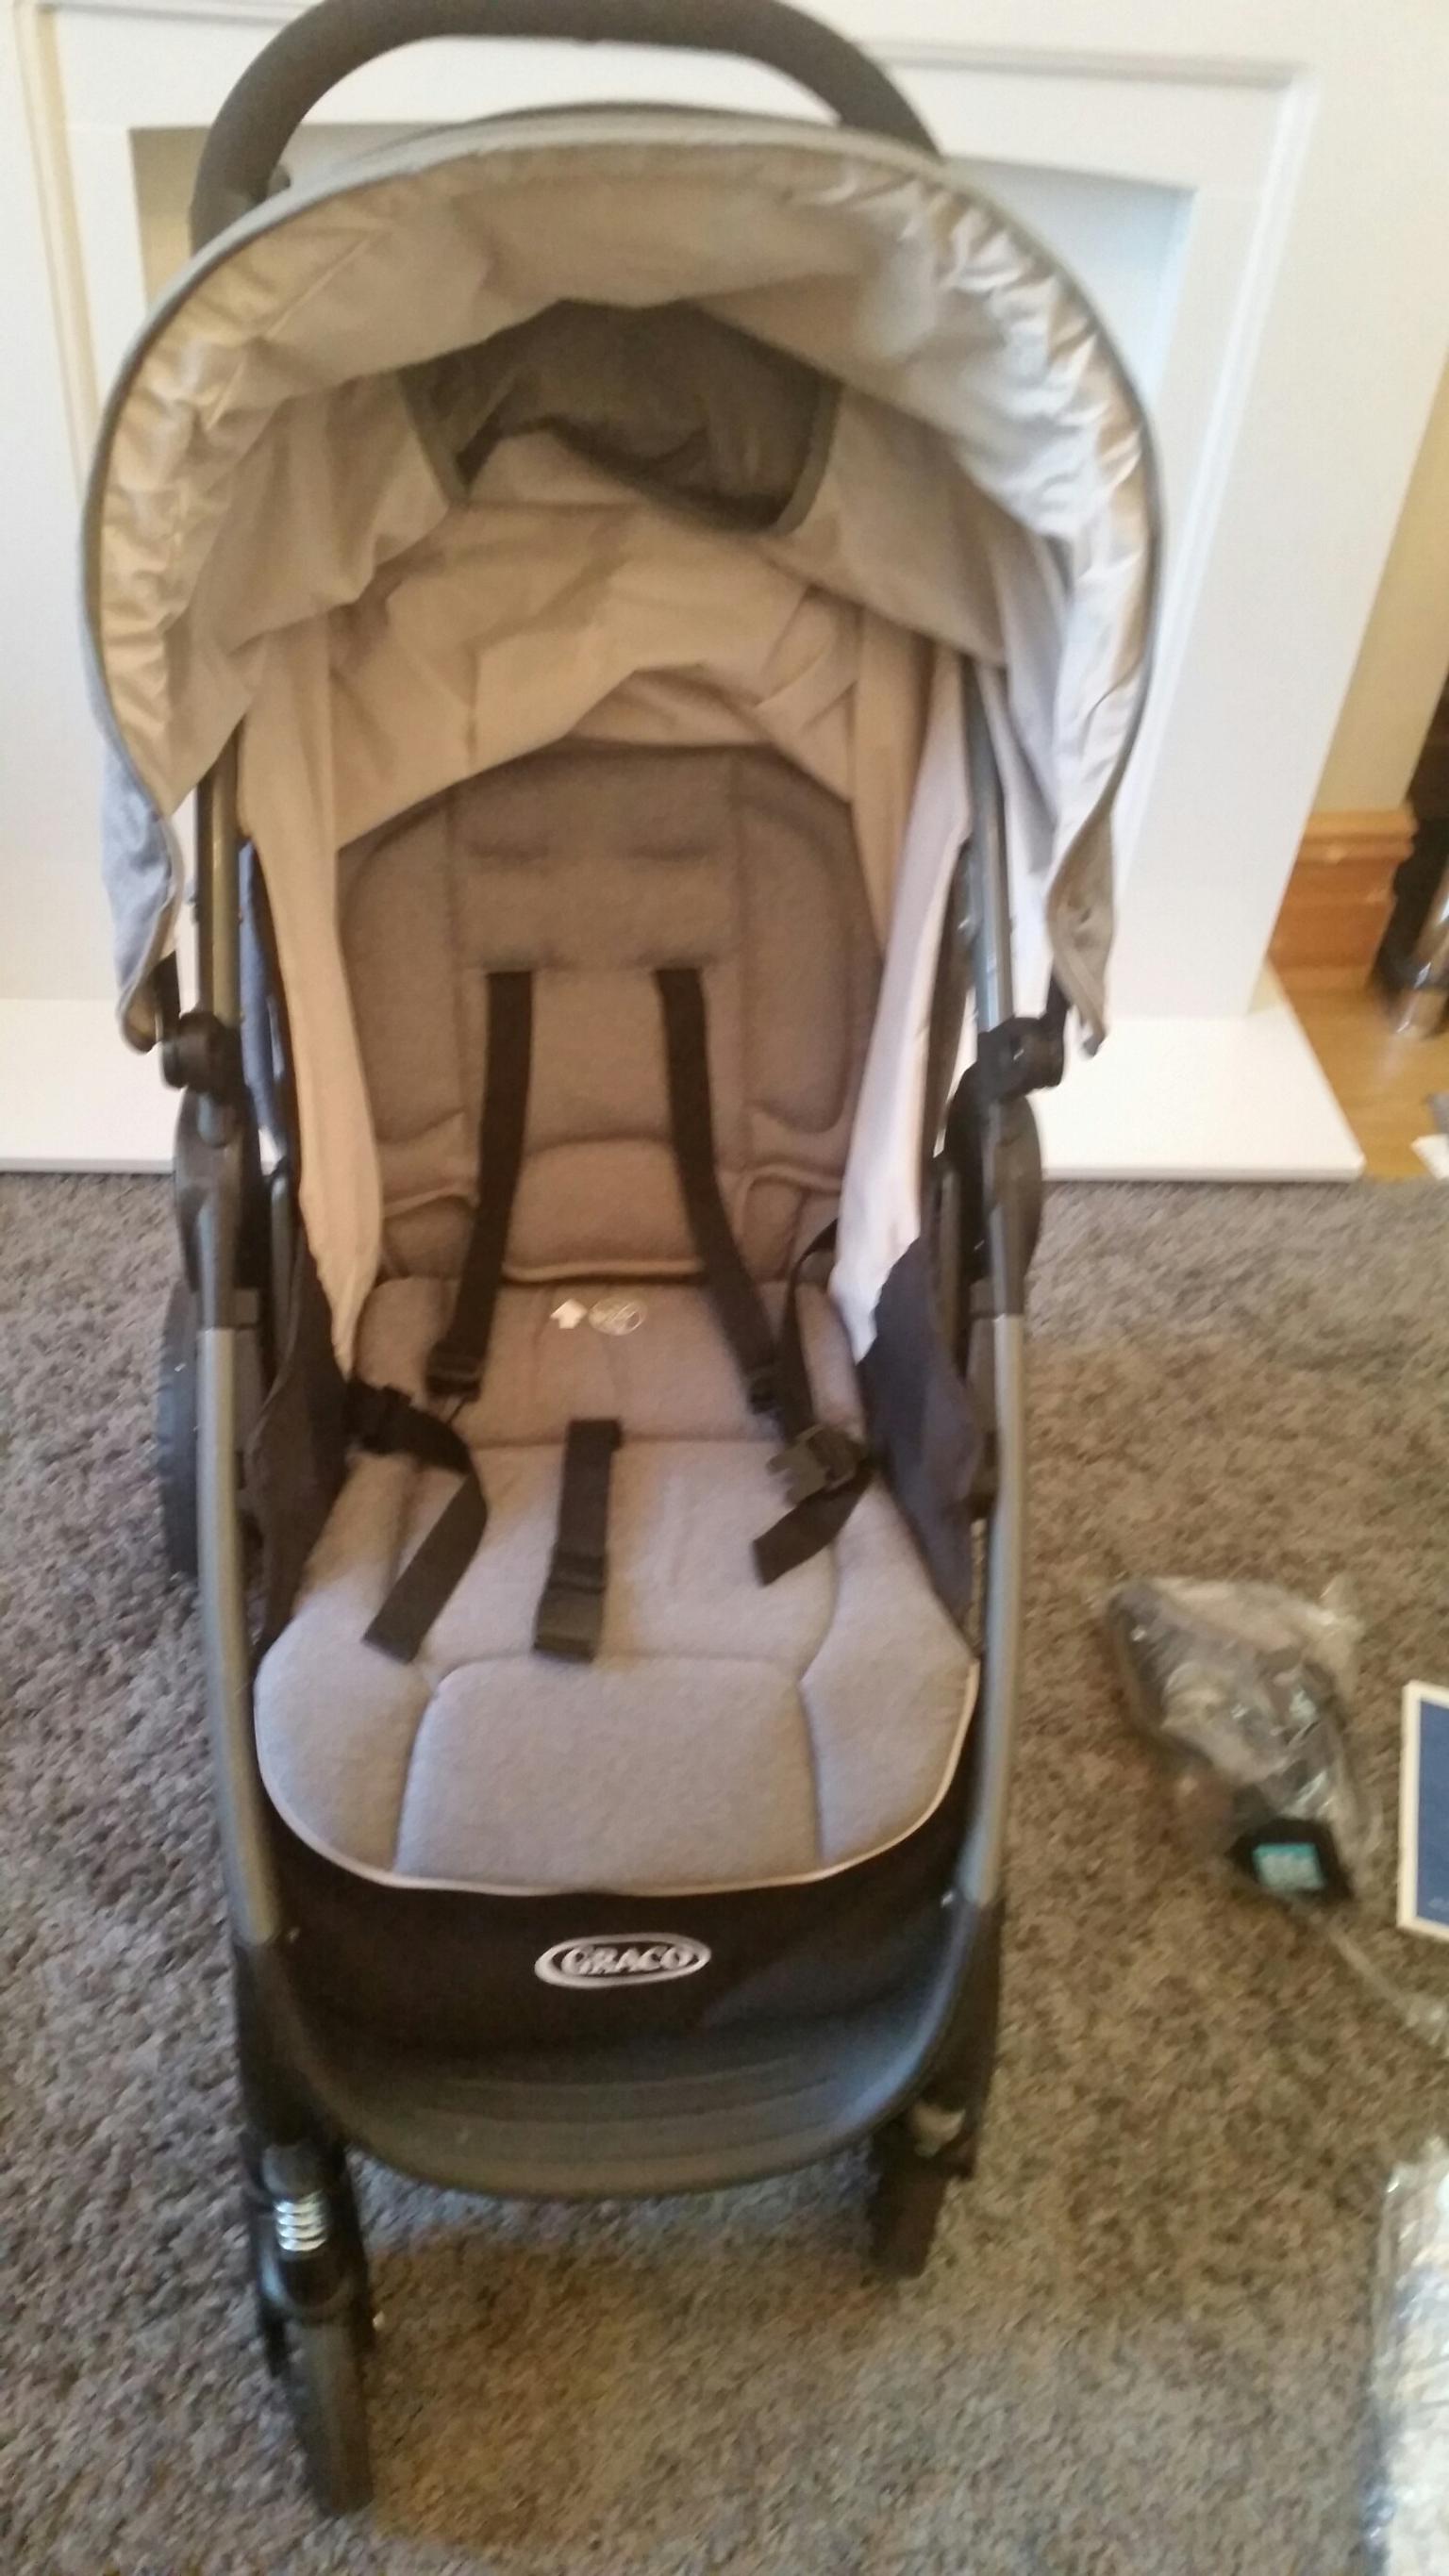 graco fastaction dlx stroller